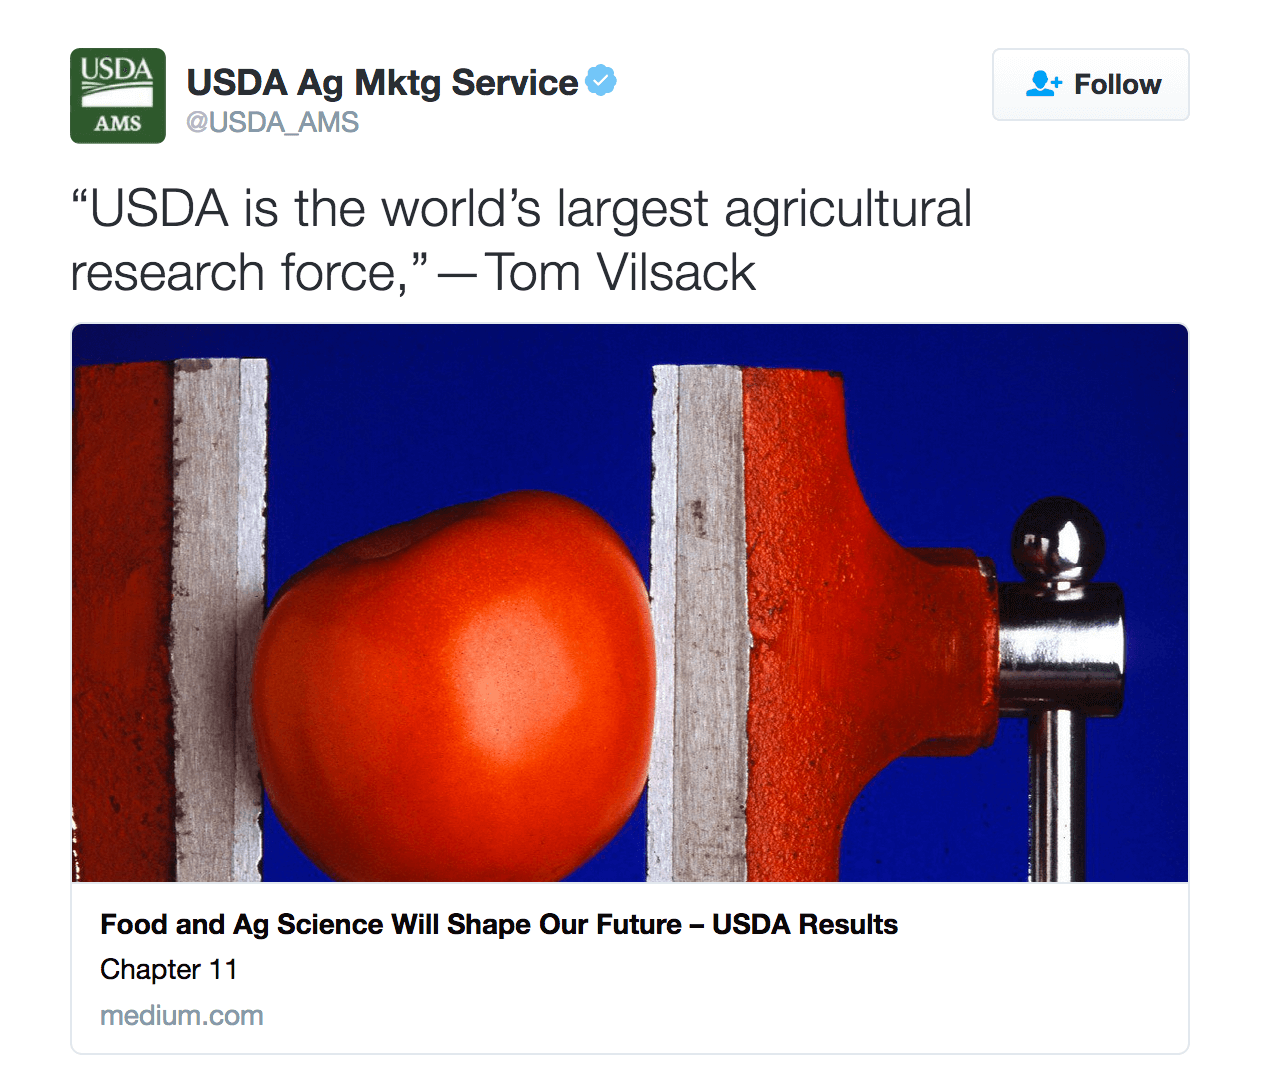 “USDA is the world’s largest agricultural research force,” — Tom Vilsack